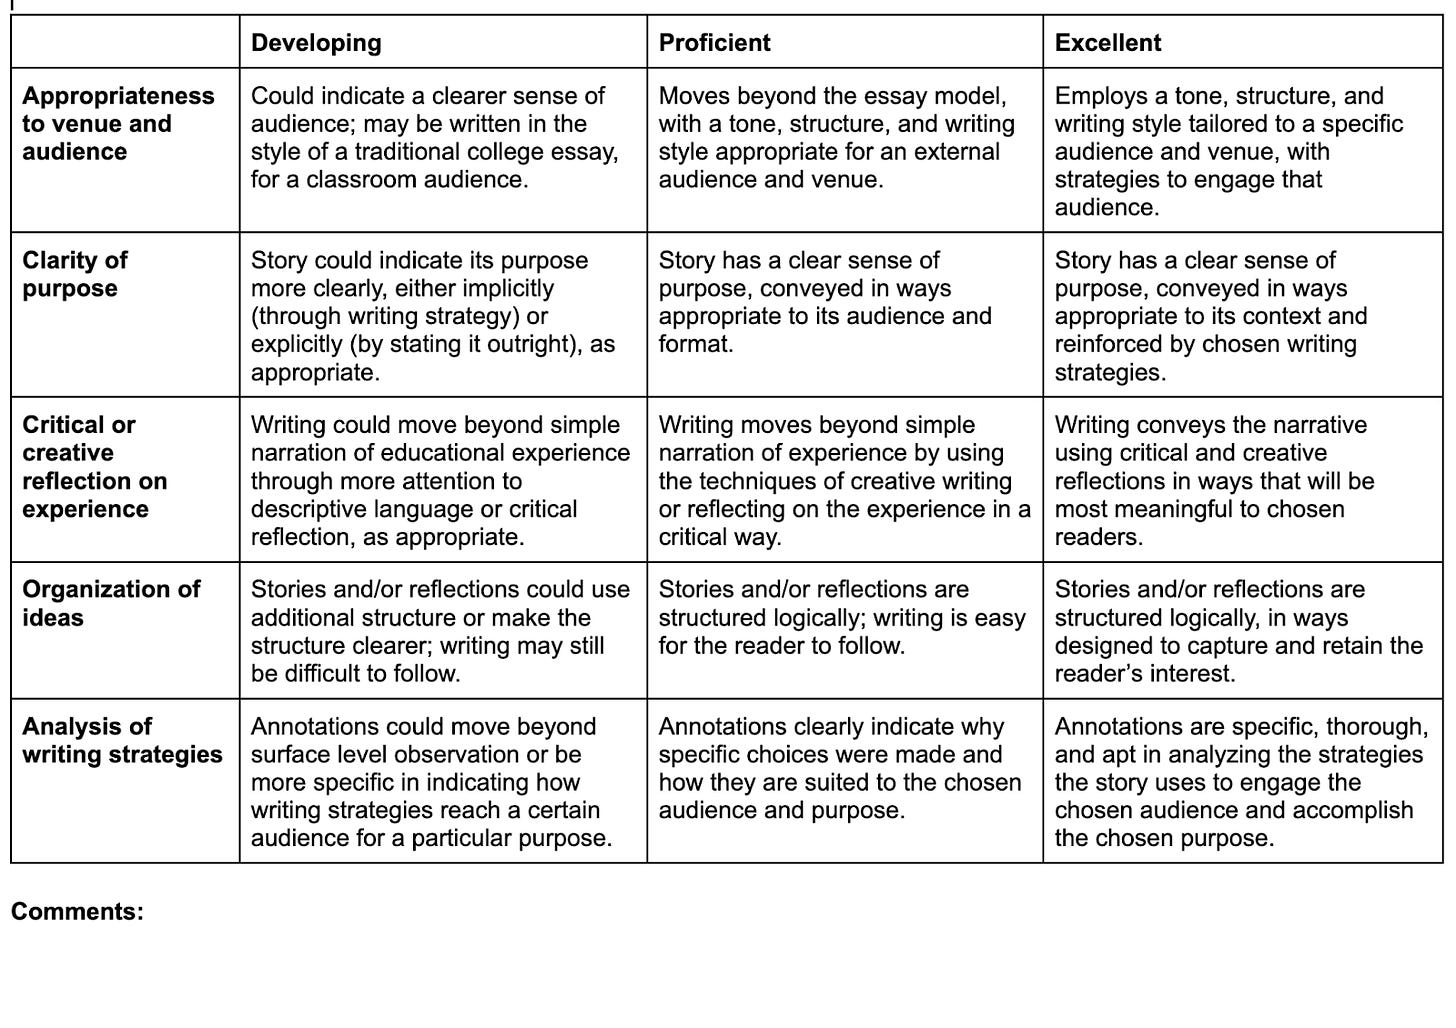 Screenshot of a rubric, formatted as a table. In the lefthand column are categories like “Clarity of purpose” and “Critical or creative reflection on experience.” The header row includes spaces to mark whether students are “Developing,” “Proficient,” or “Excellent” along each category. For example, the mark for “Proficient” in “Clarity of purpose” reads, “Story has a clear sense of purpose, conveyed in ways appropriate to its audience and format.”